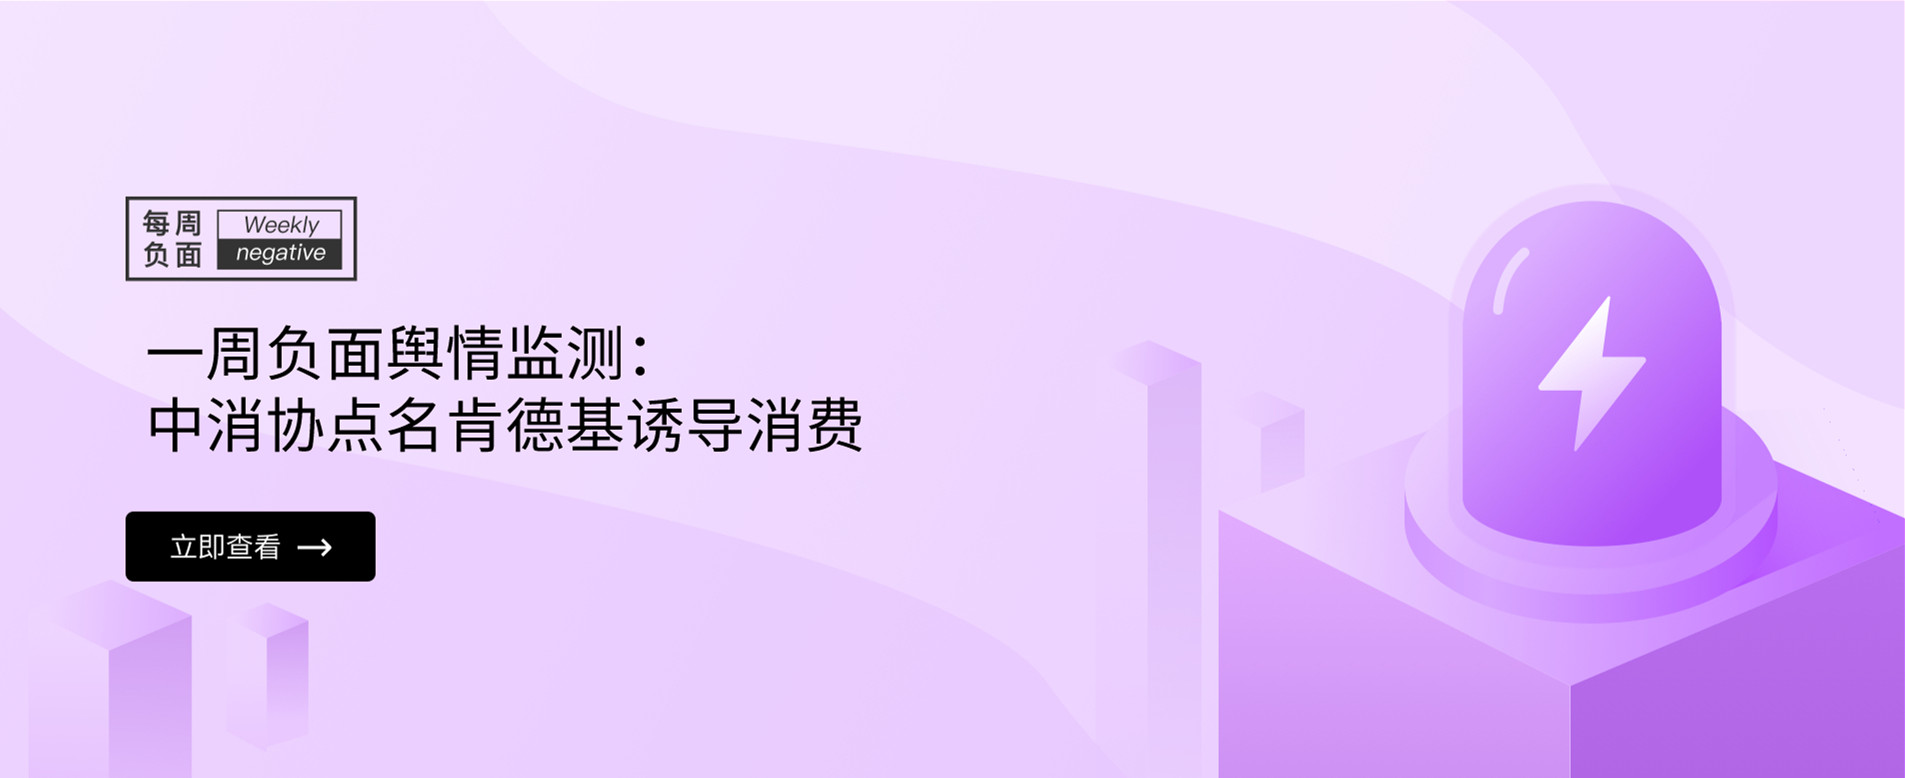 mohodata官网首页轮播banner2